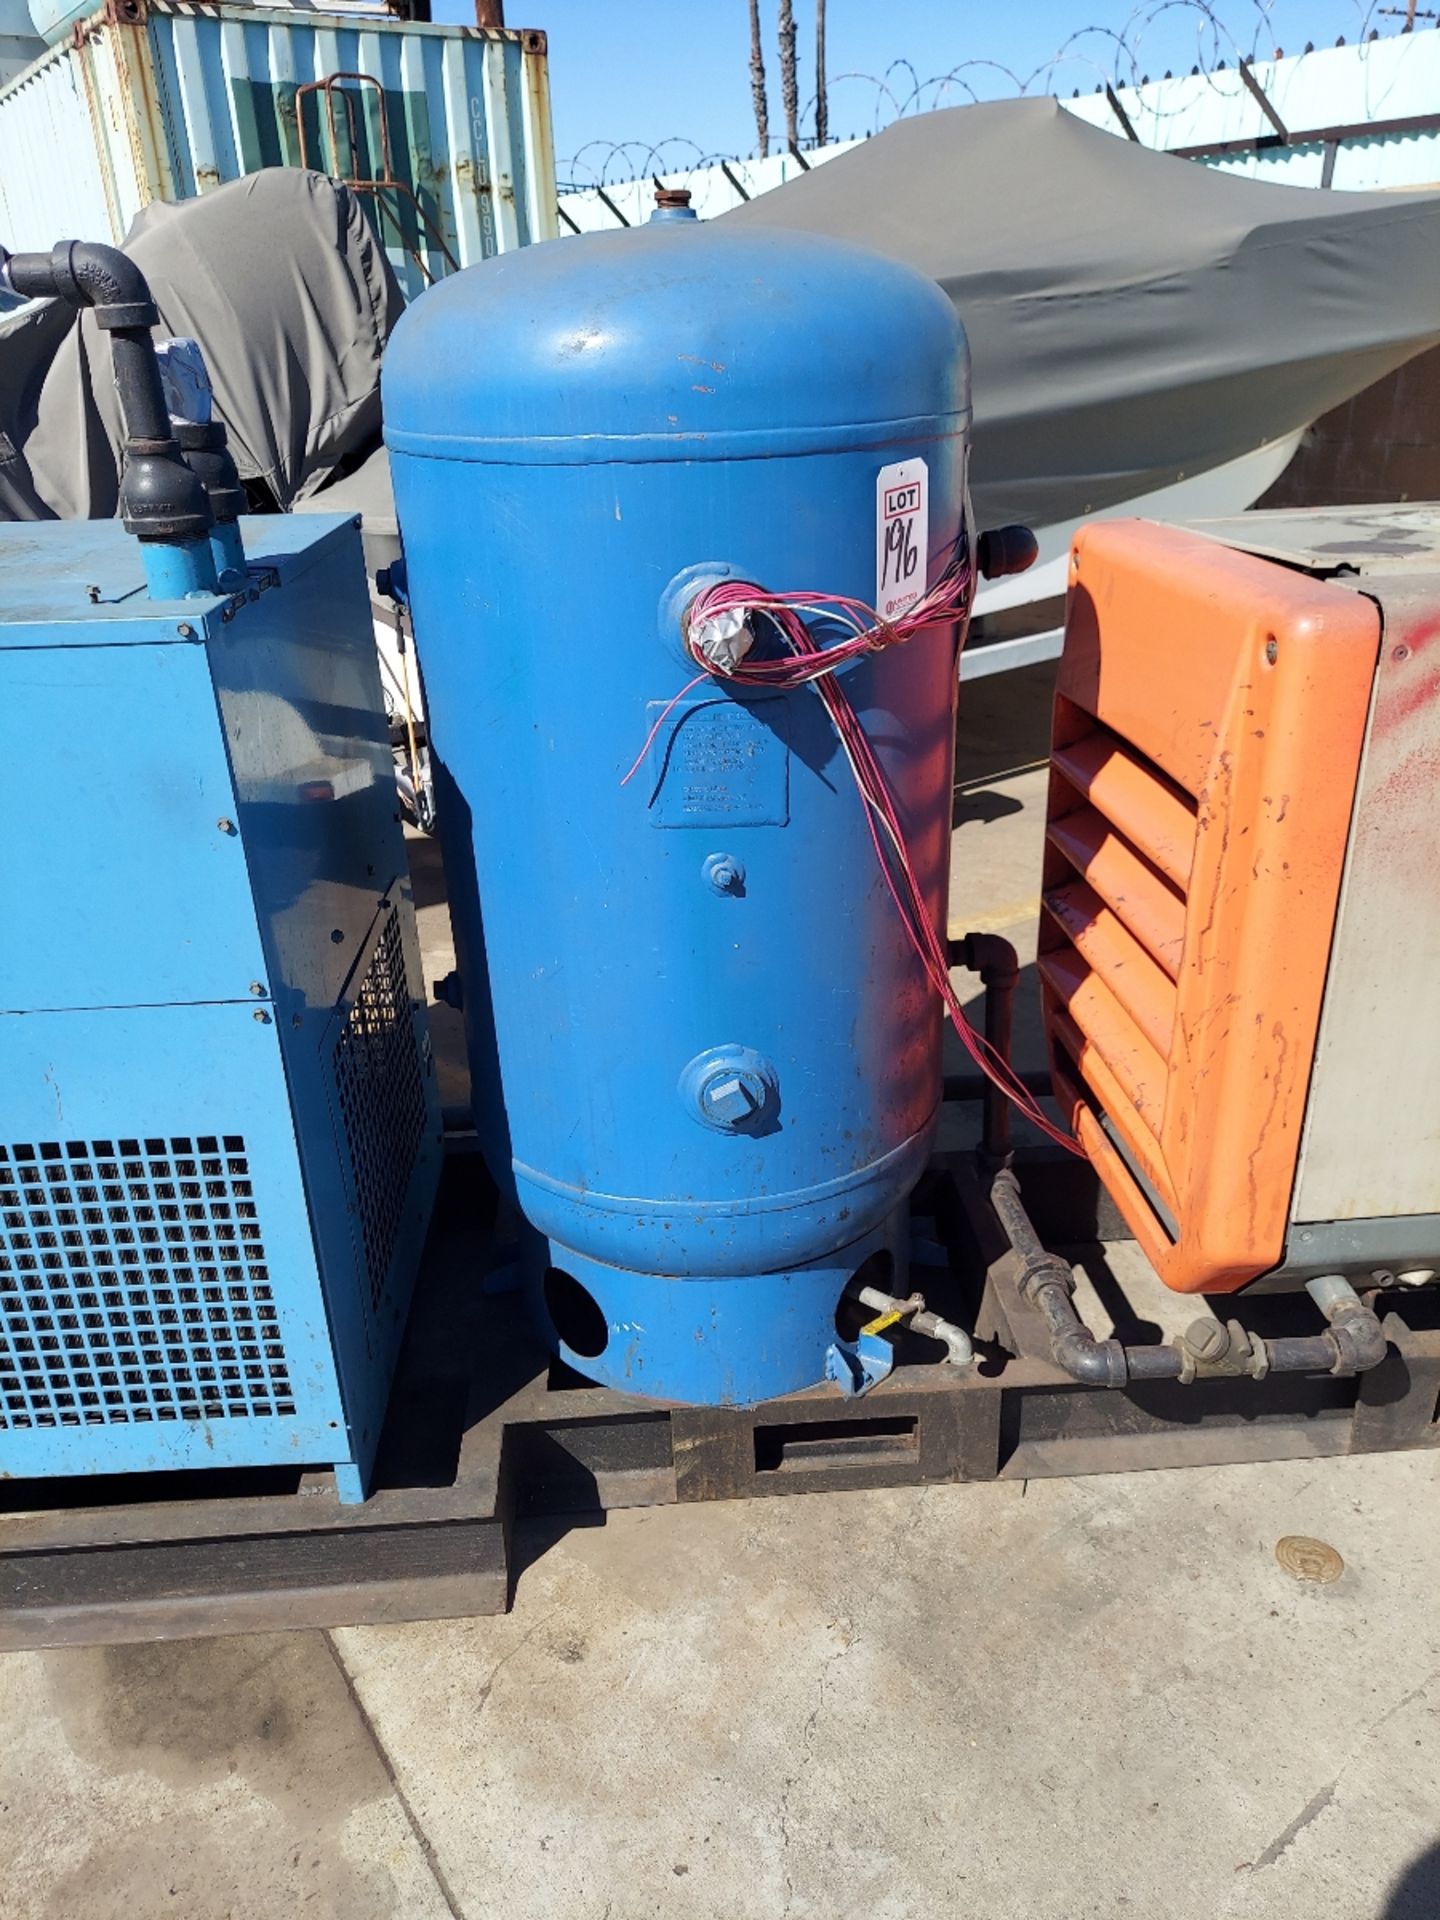 MATTEI SCREW TYPE AIR COMPRESSOR, ARROW AIR DRYER, RECEIVING TANK, SKID MOUNTED FOR TRAVEL - Image 8 of 14